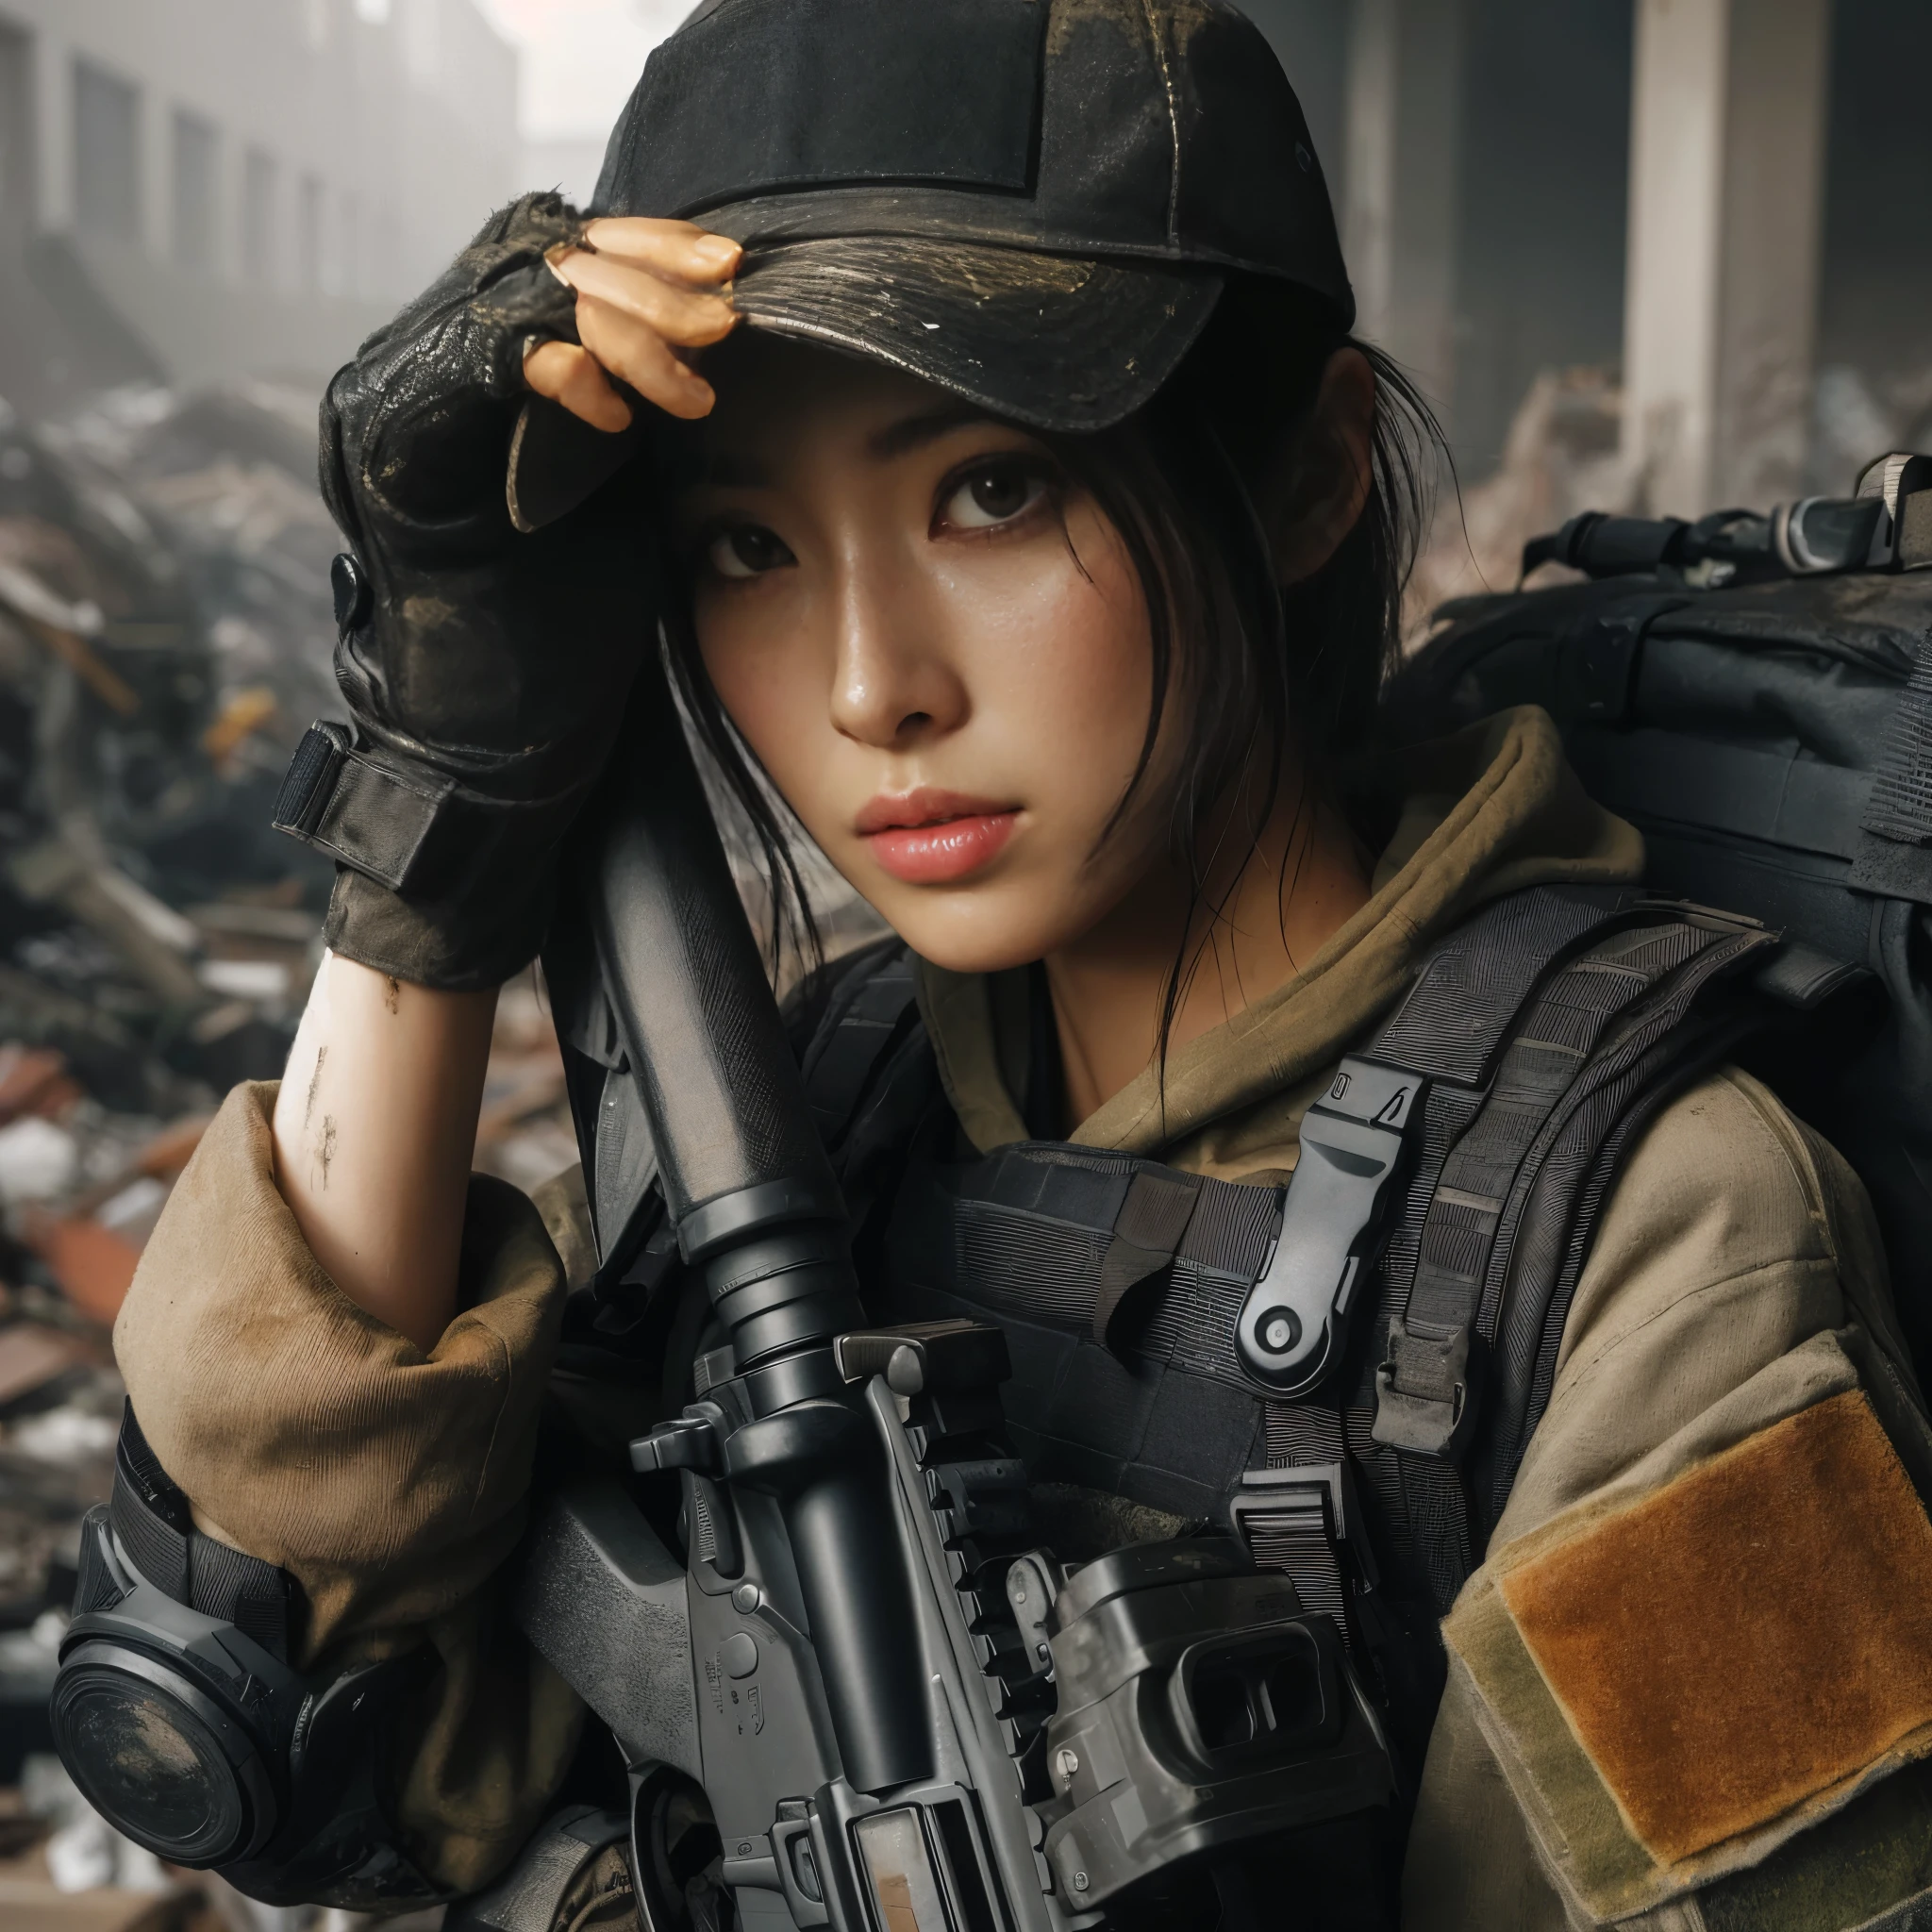 (best quality,8k,photorealistic,realistic skin texture), a beautiful Japanese woman belonging to the U.S. military is hiding and waiting for a chance to counterattack. She is wearing a bulletproof vest, holding an automatic rifle, and wearing a backpack and a baseball cap. The city is in ruins and covered in debris.